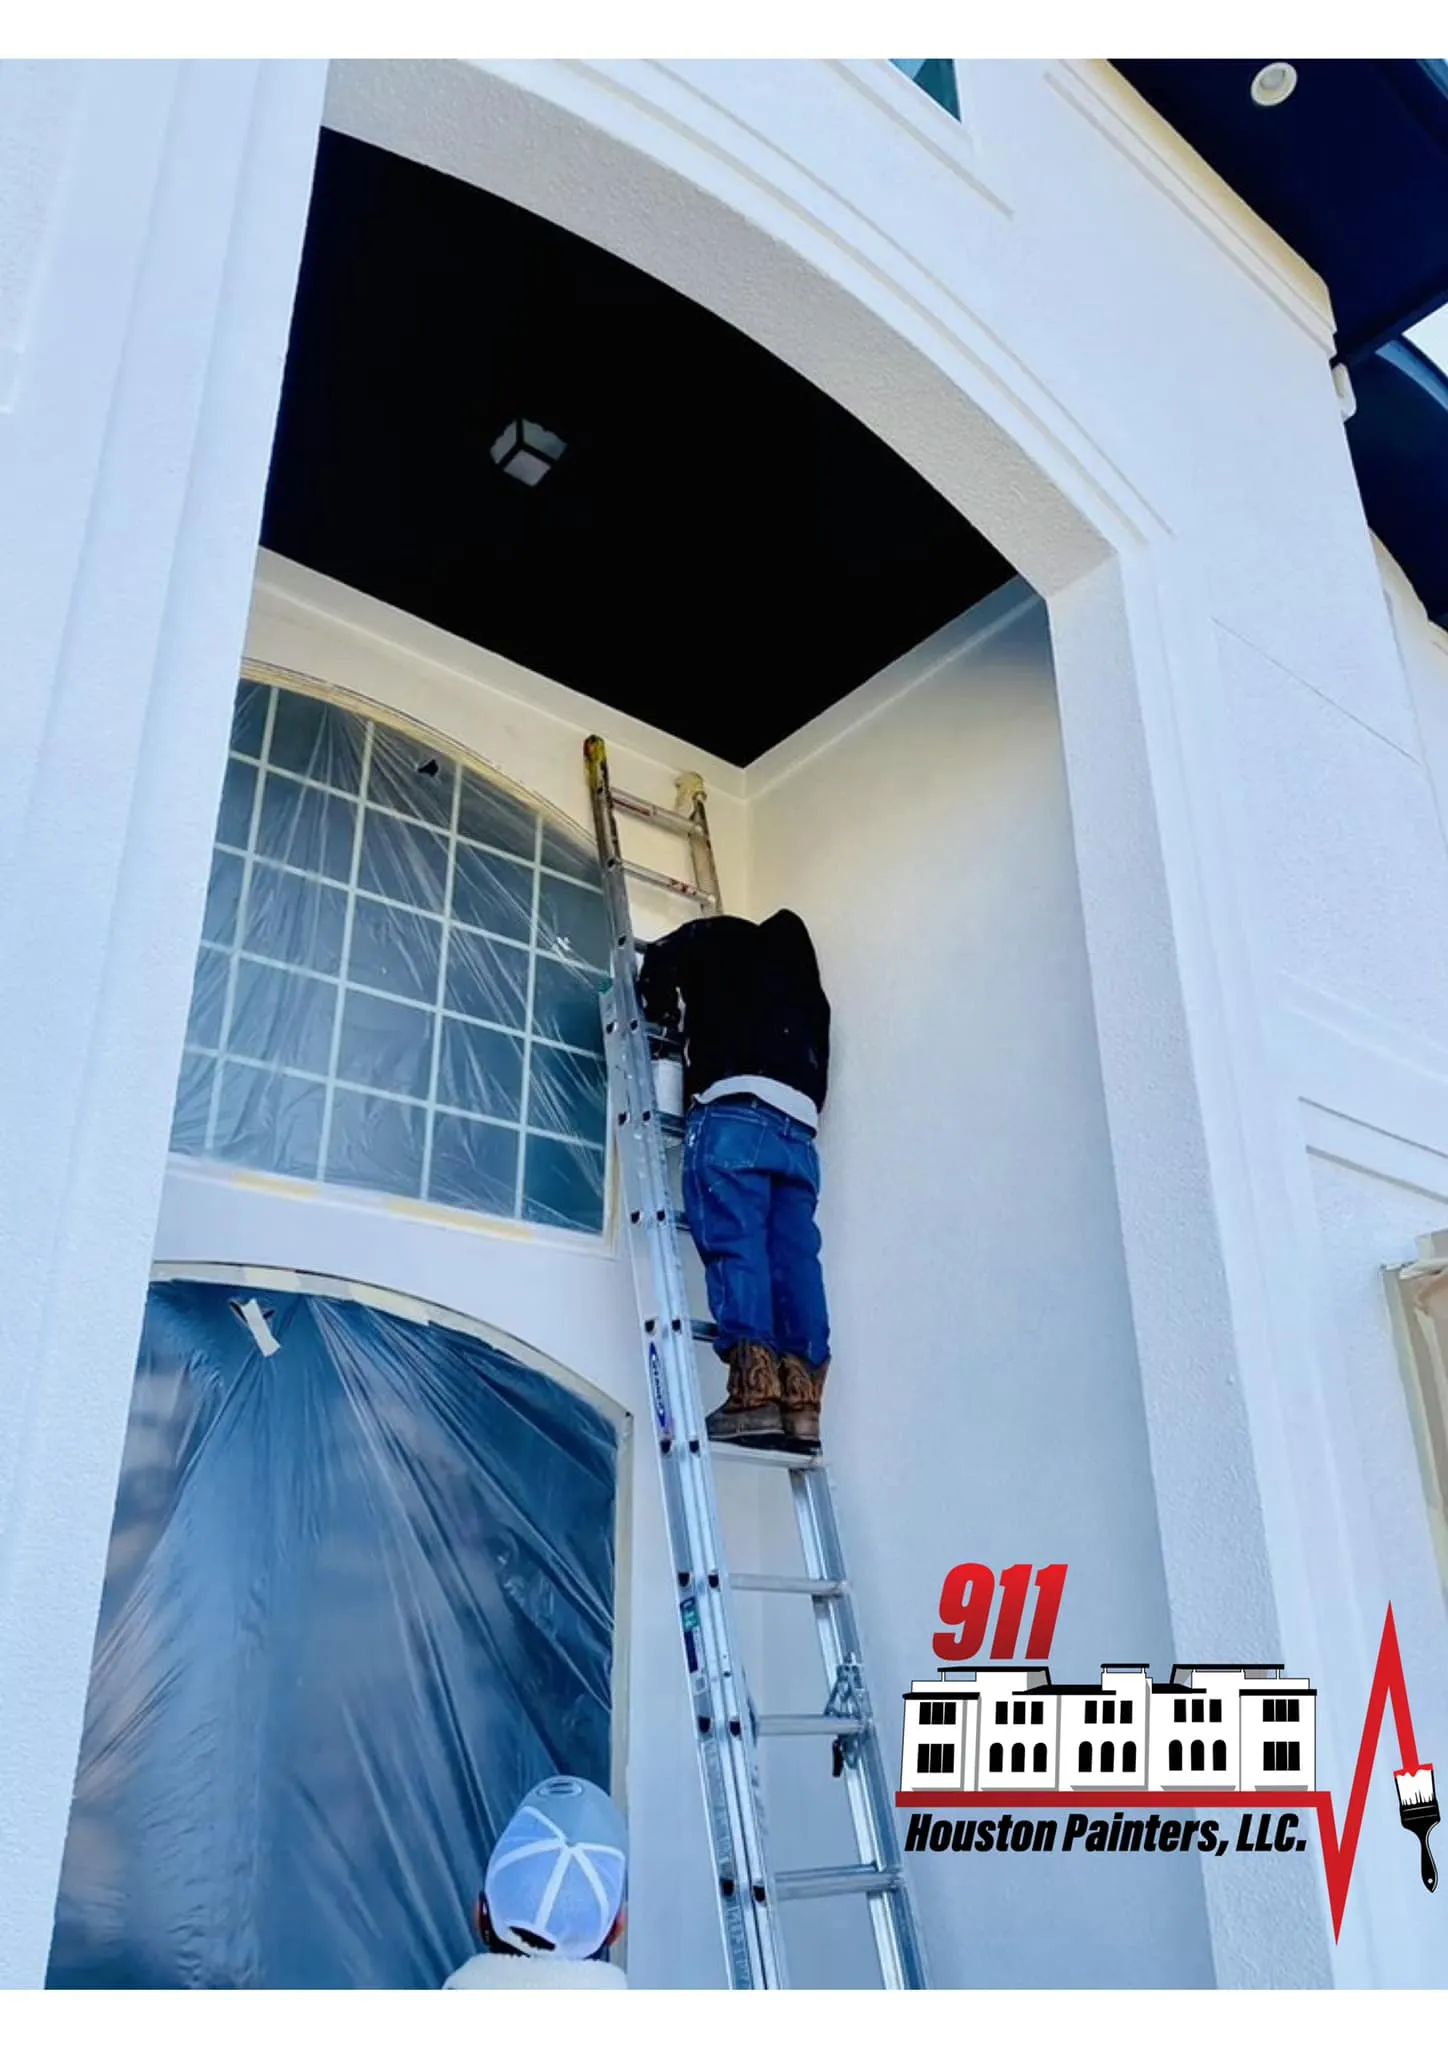 Interior Painting for 911 Houston Painters, LLC in Houston, TX